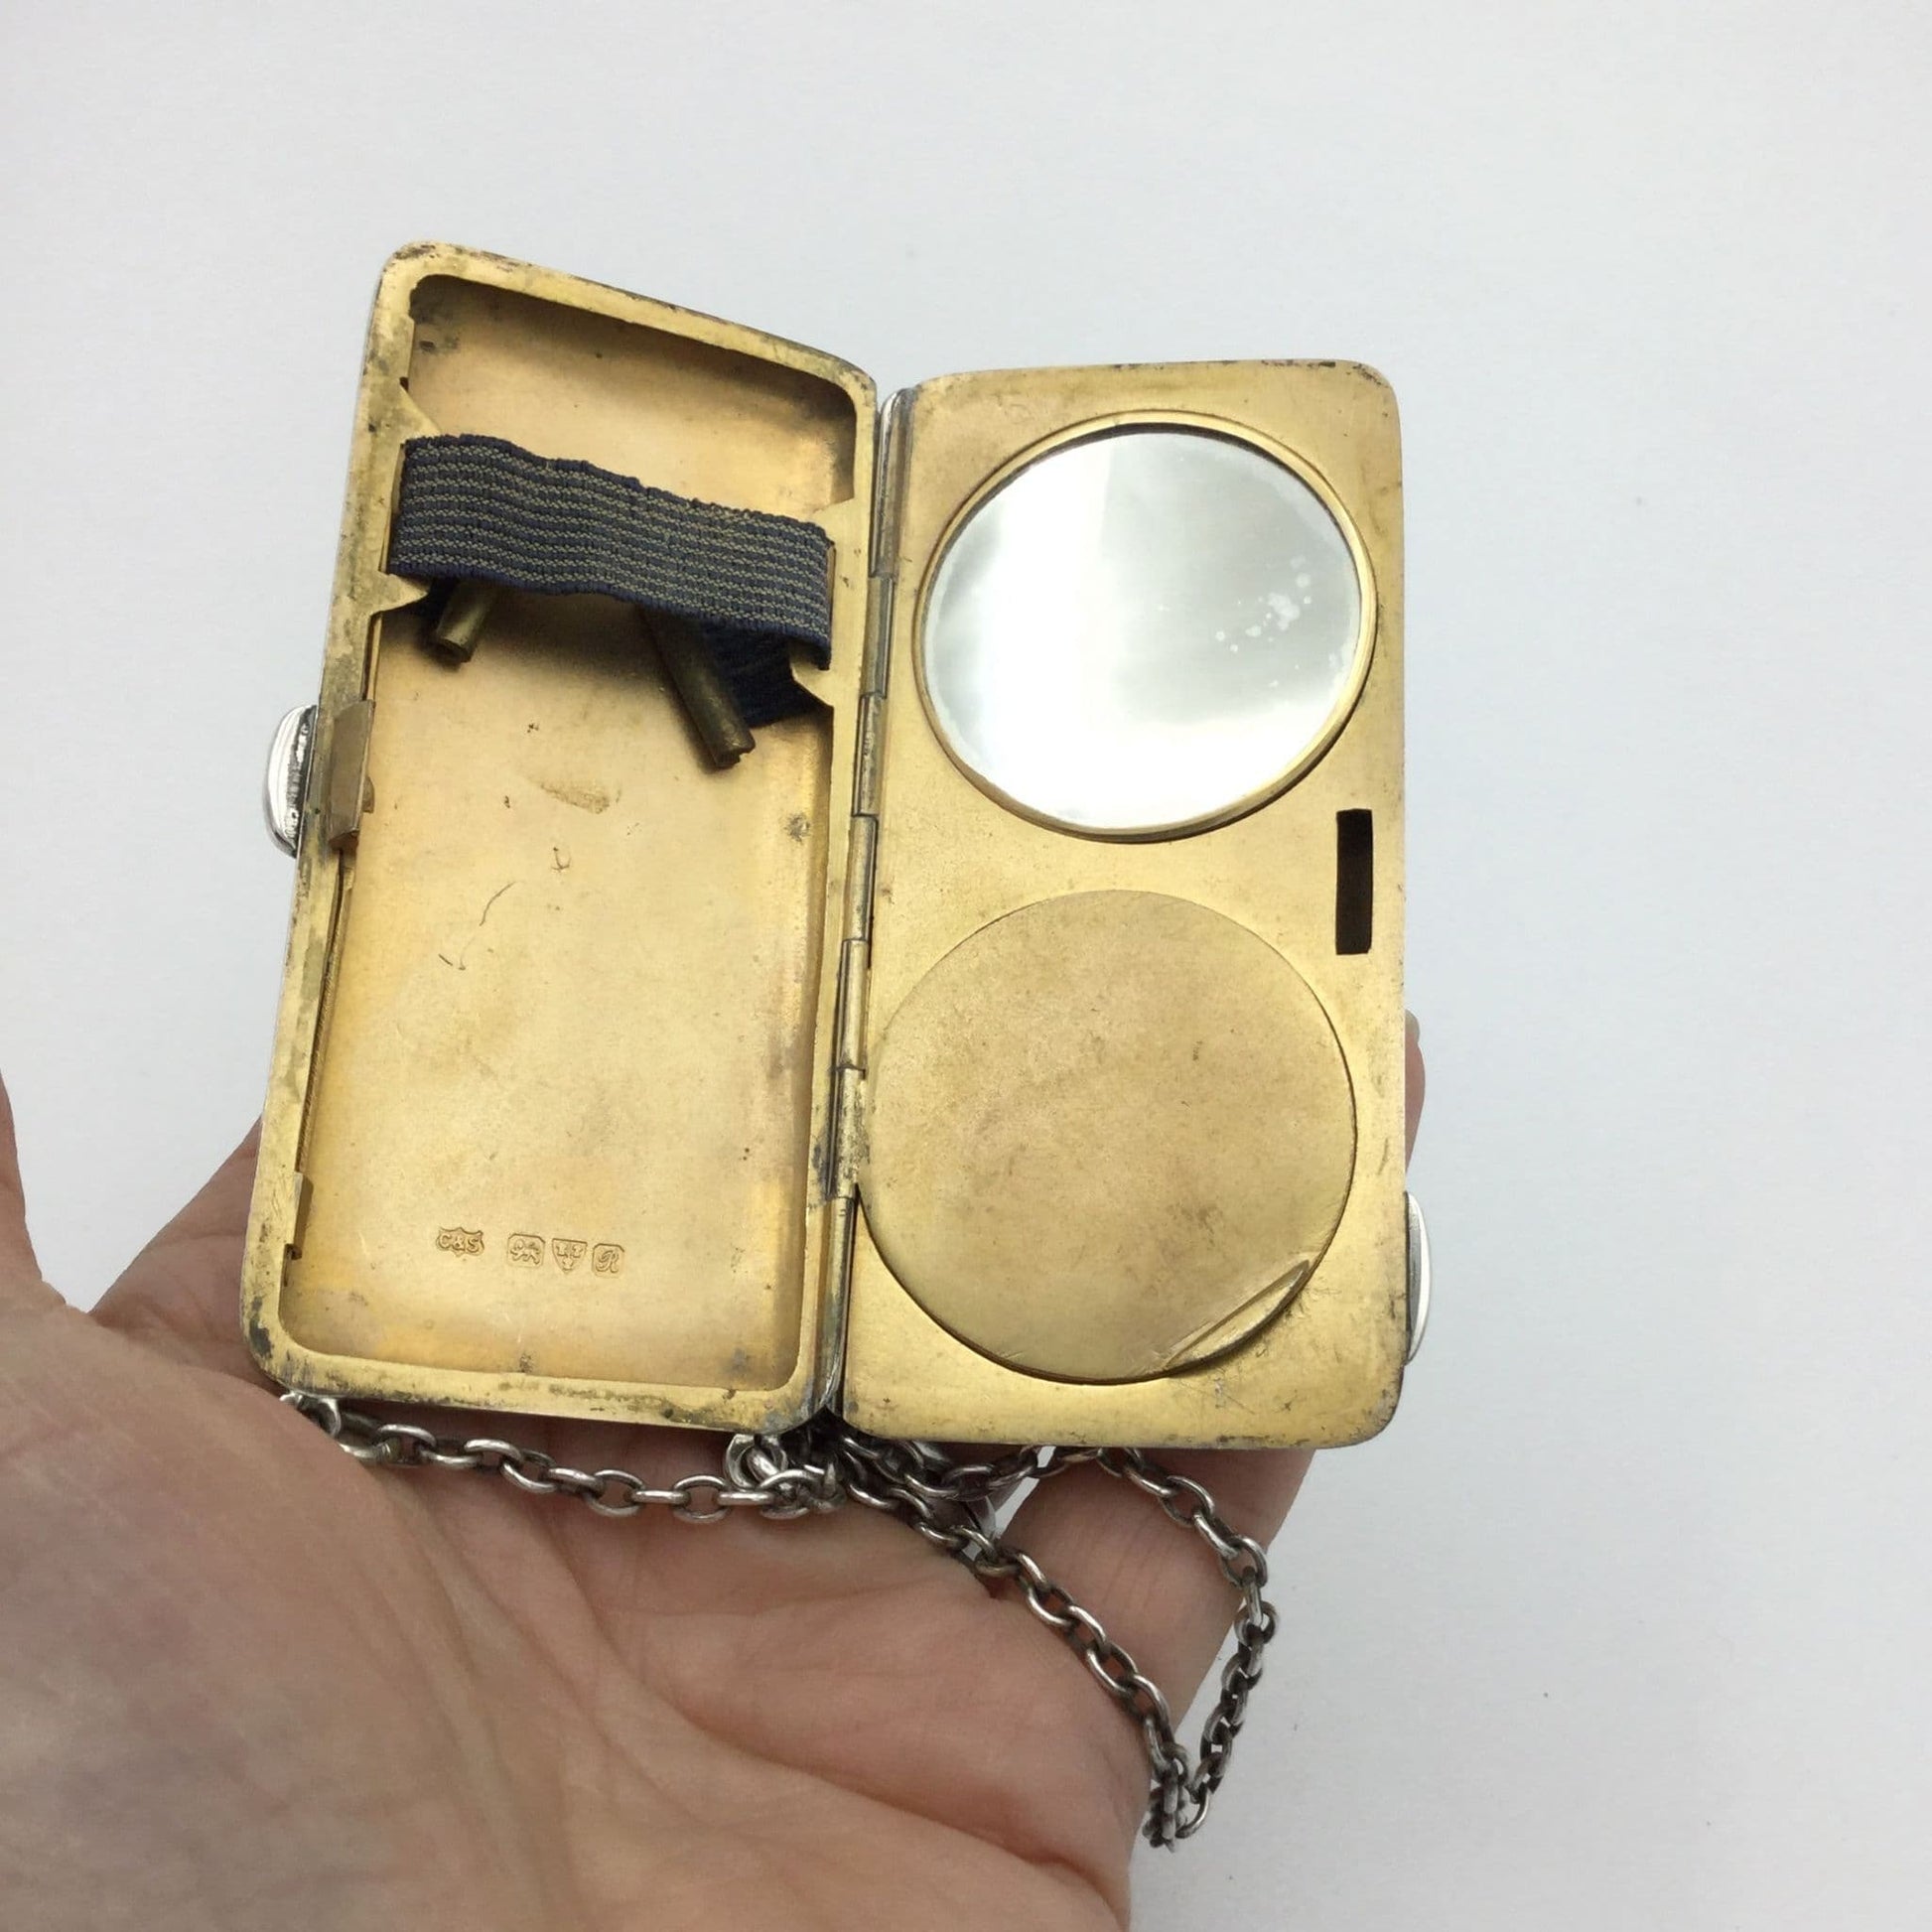 gilded golden inside of case showing a mirror, powder area and chain held in a hand